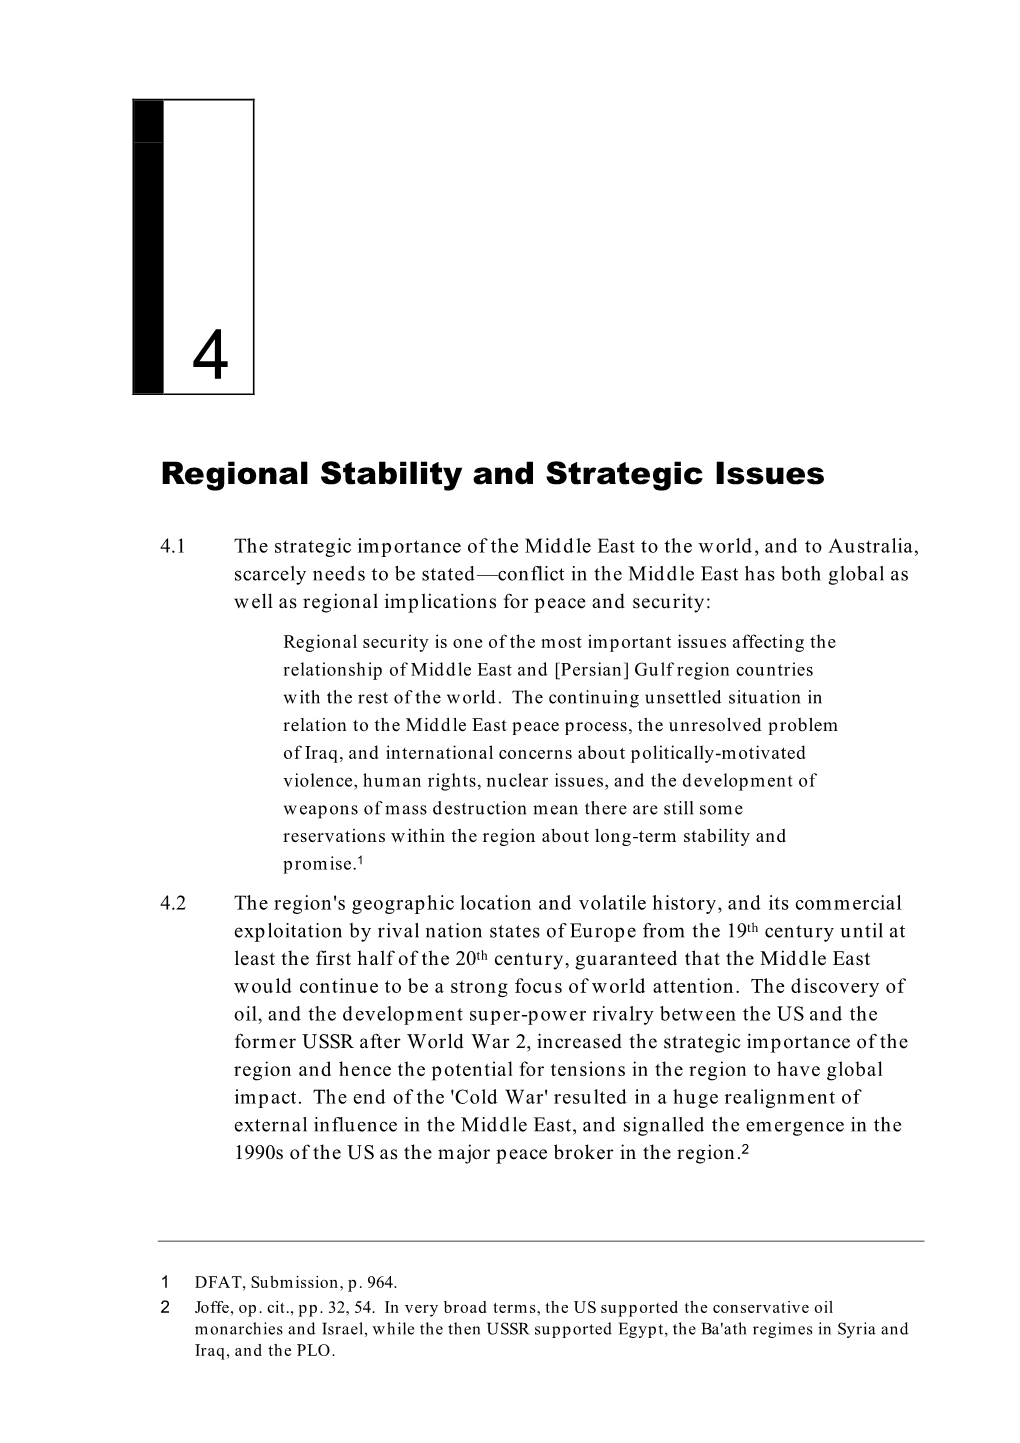 Chapter 4: Regional Stability and Strategic Issues